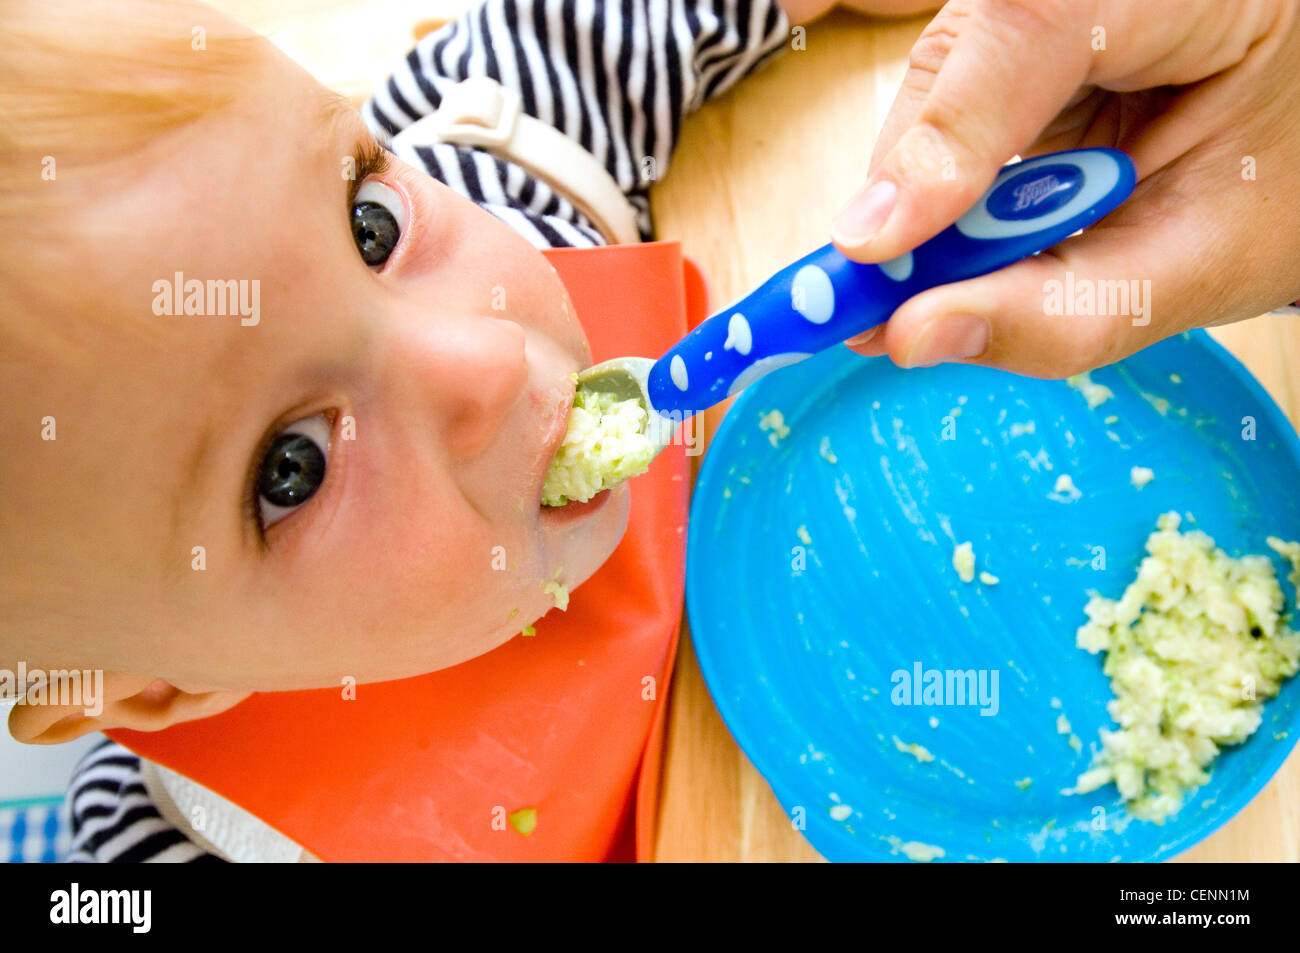 Close up of blonde male child aged months wearing a black and white stripey top and an orange bib being fed baby food a blue Stock Photo